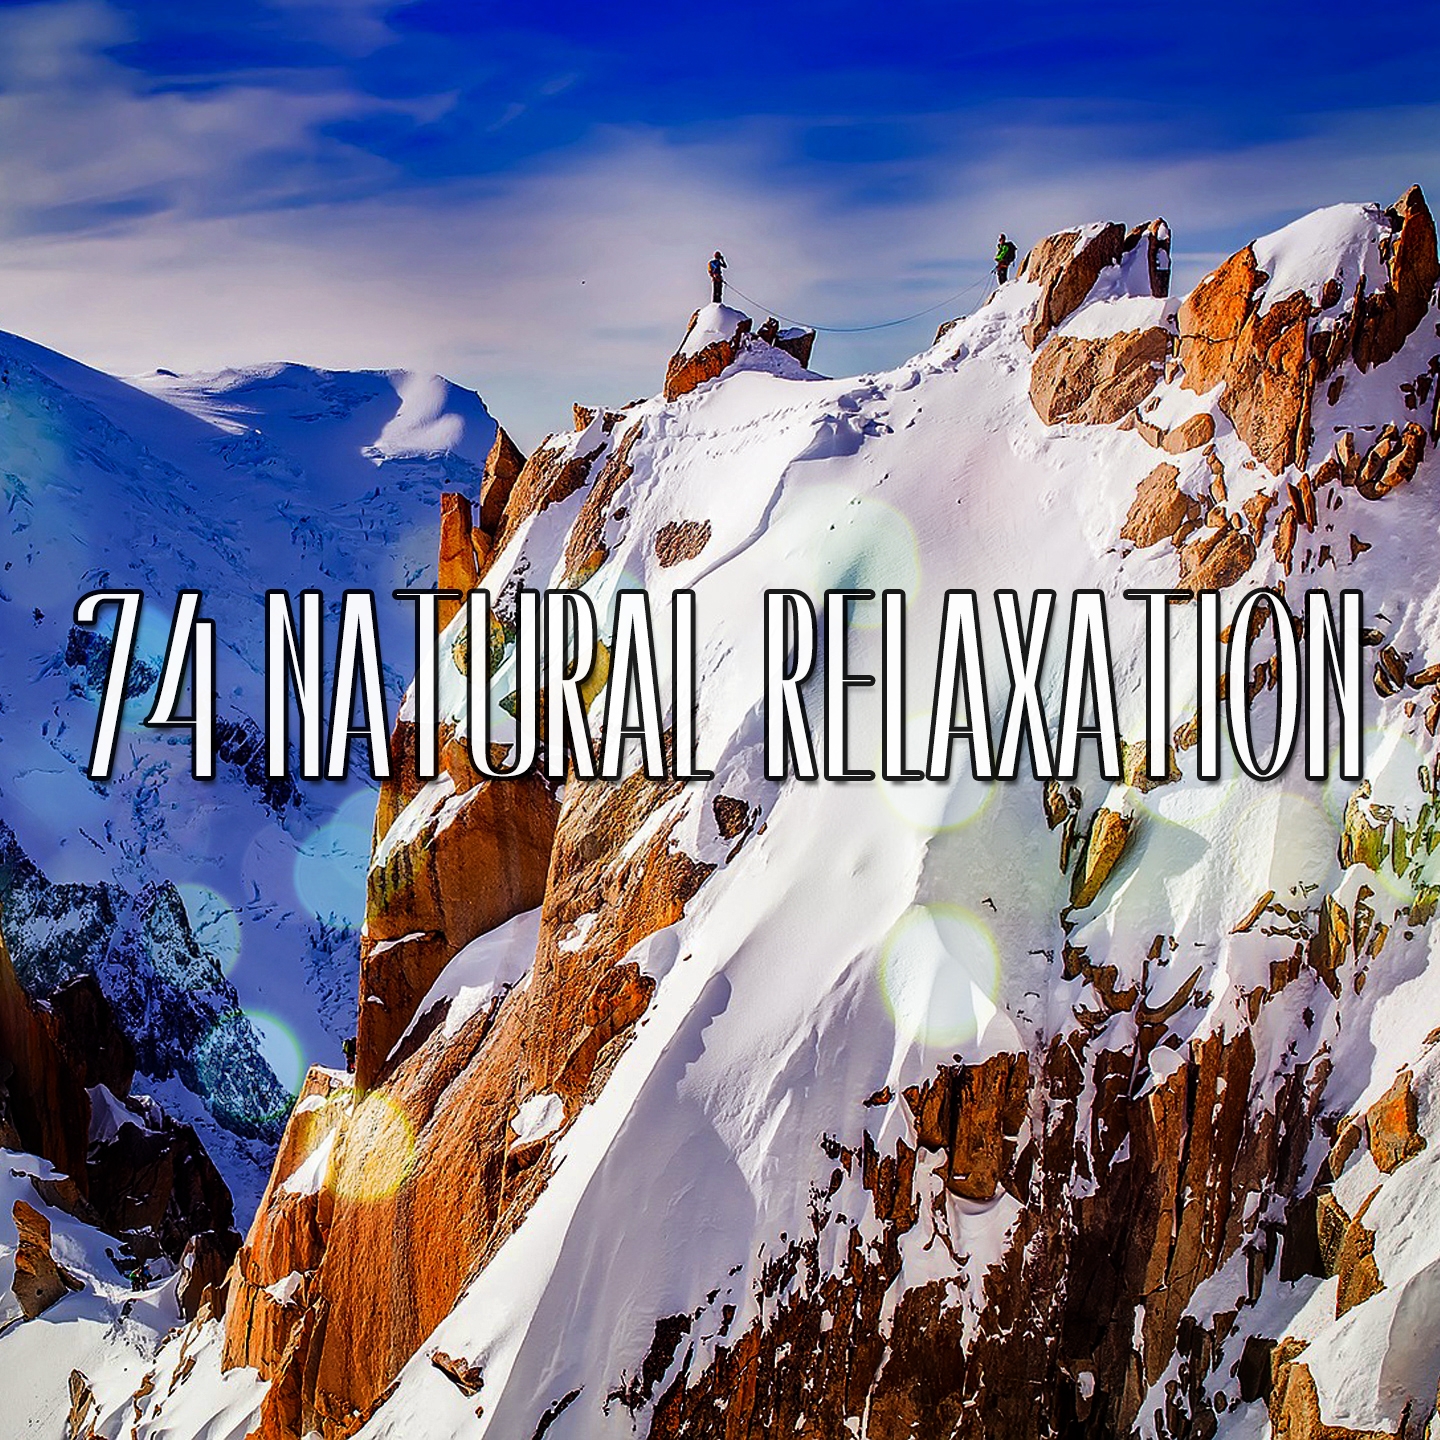 74 Natural Relaxation